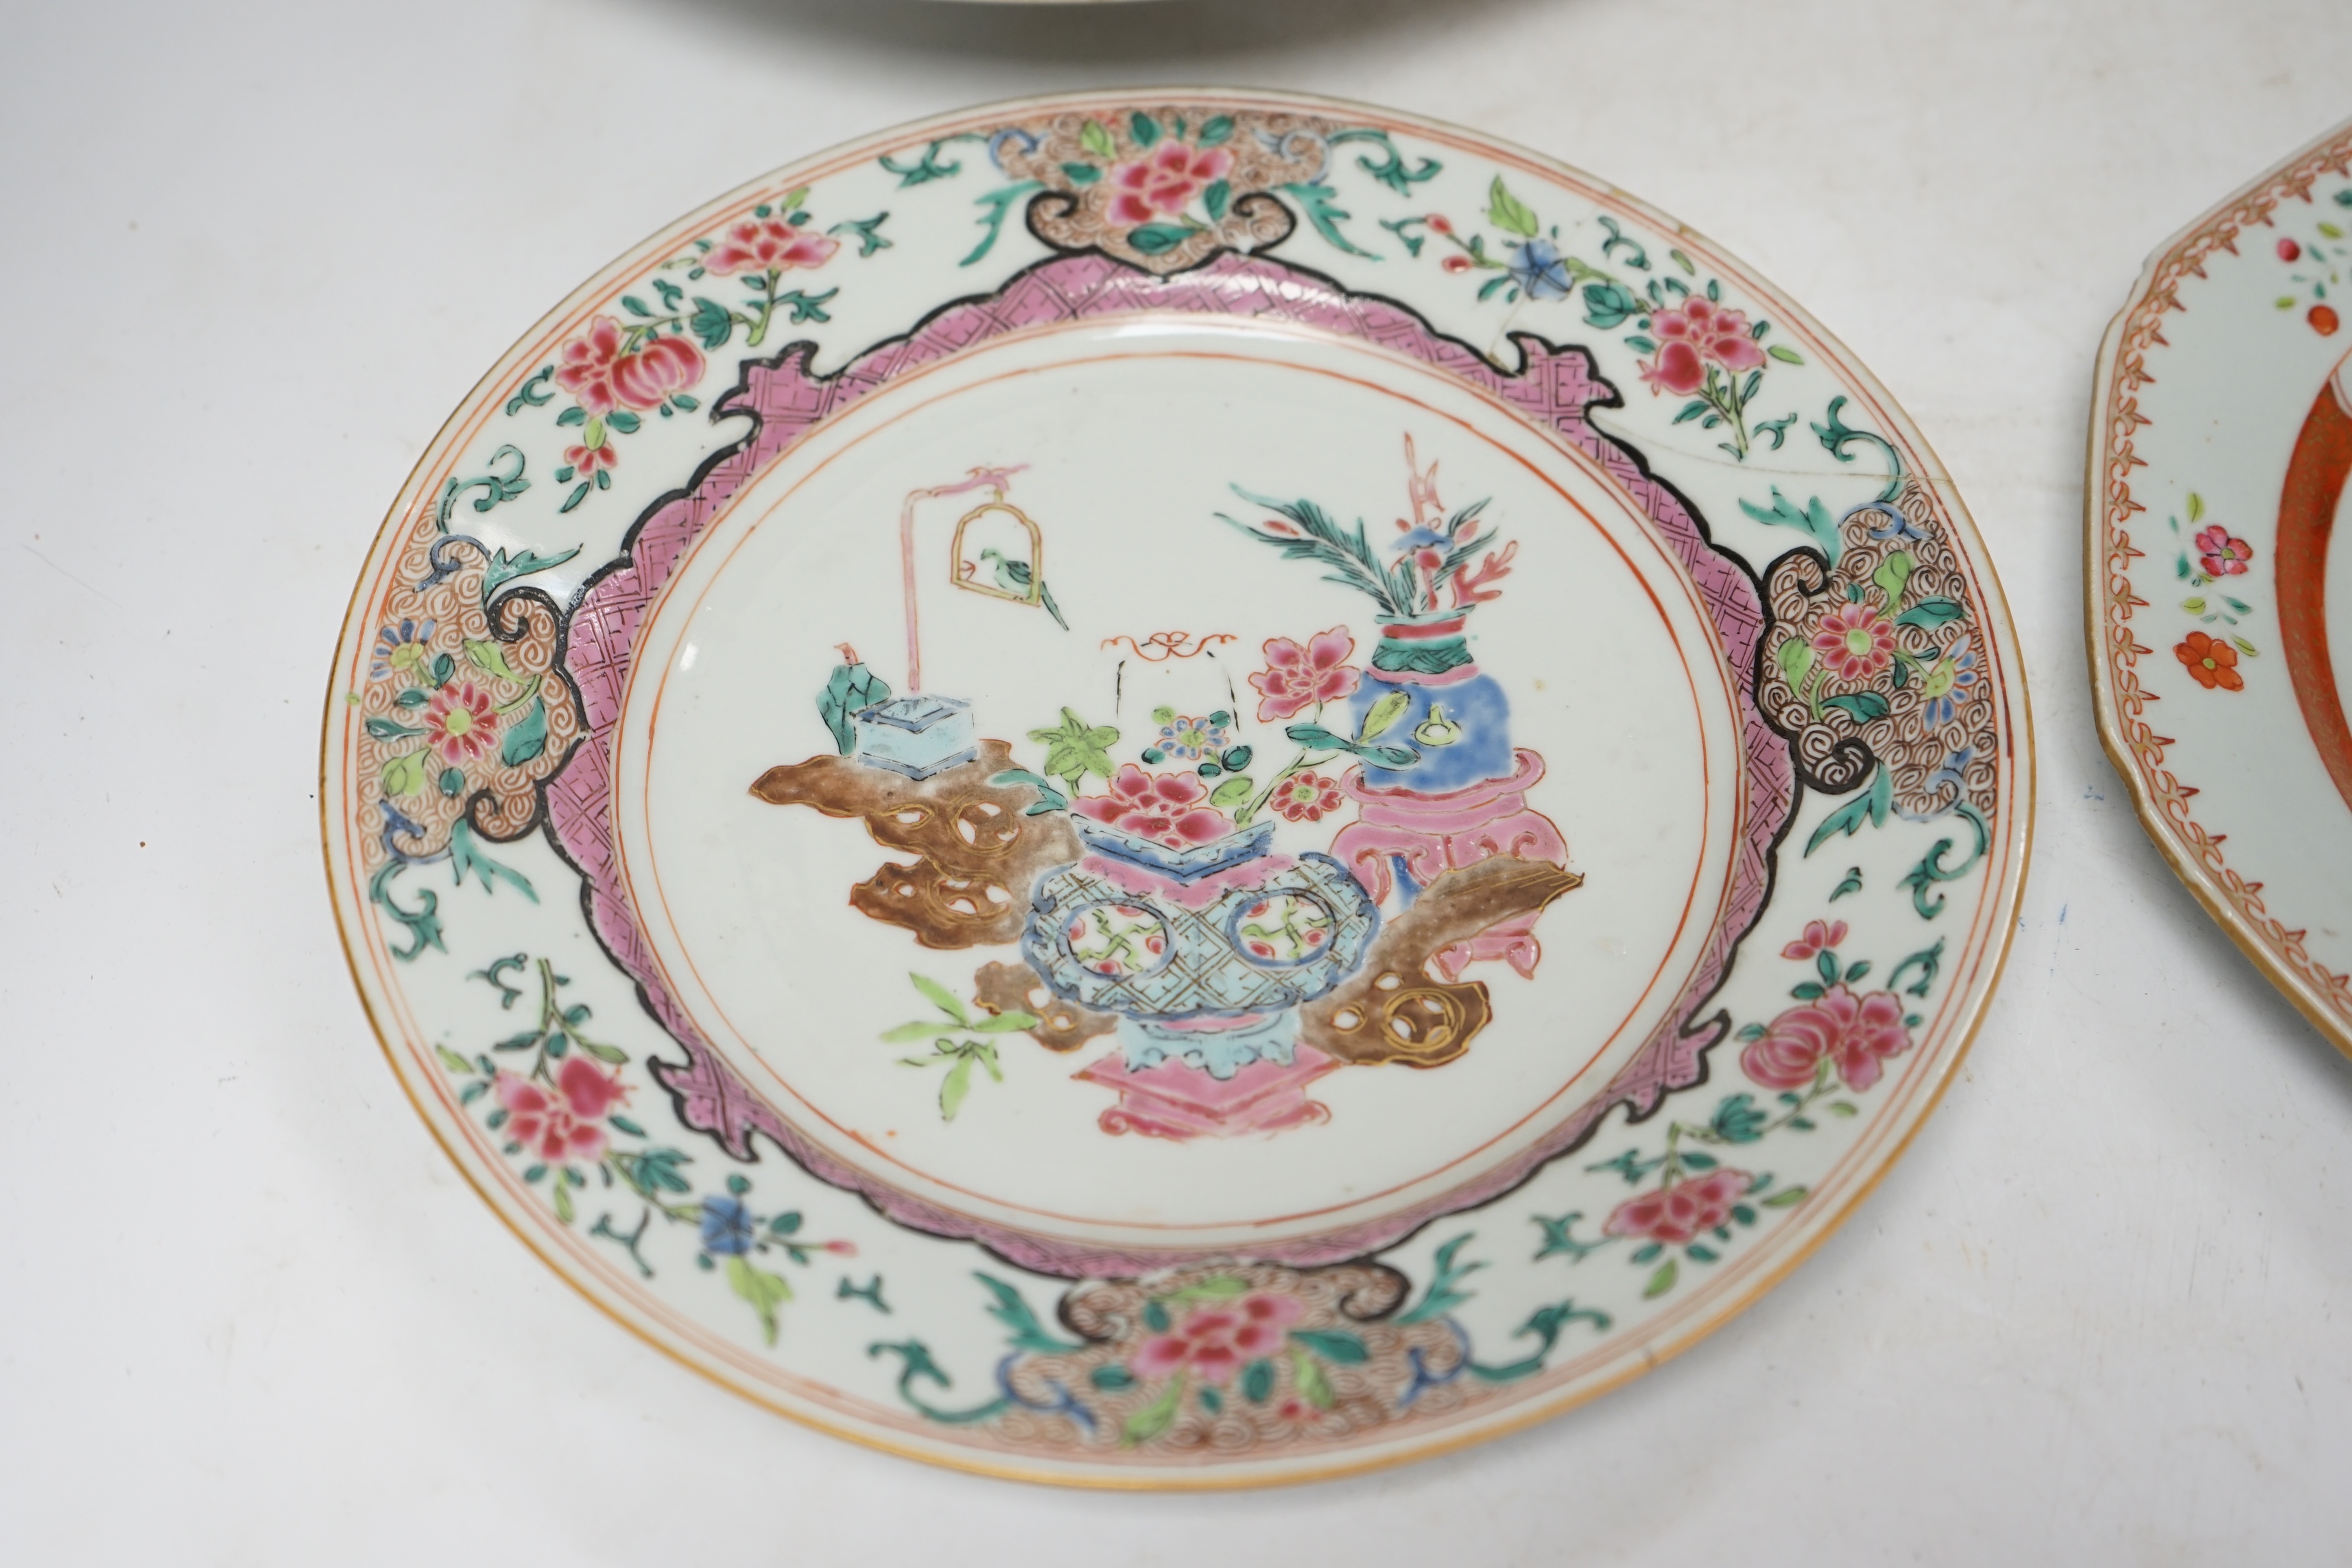 A pair of Chinese famille rose octagonal dishes, one other similar and a Cantonese dish, 18th/19th century, largest 29.5cm (4). Condition - circular famille rose dish with a restored area